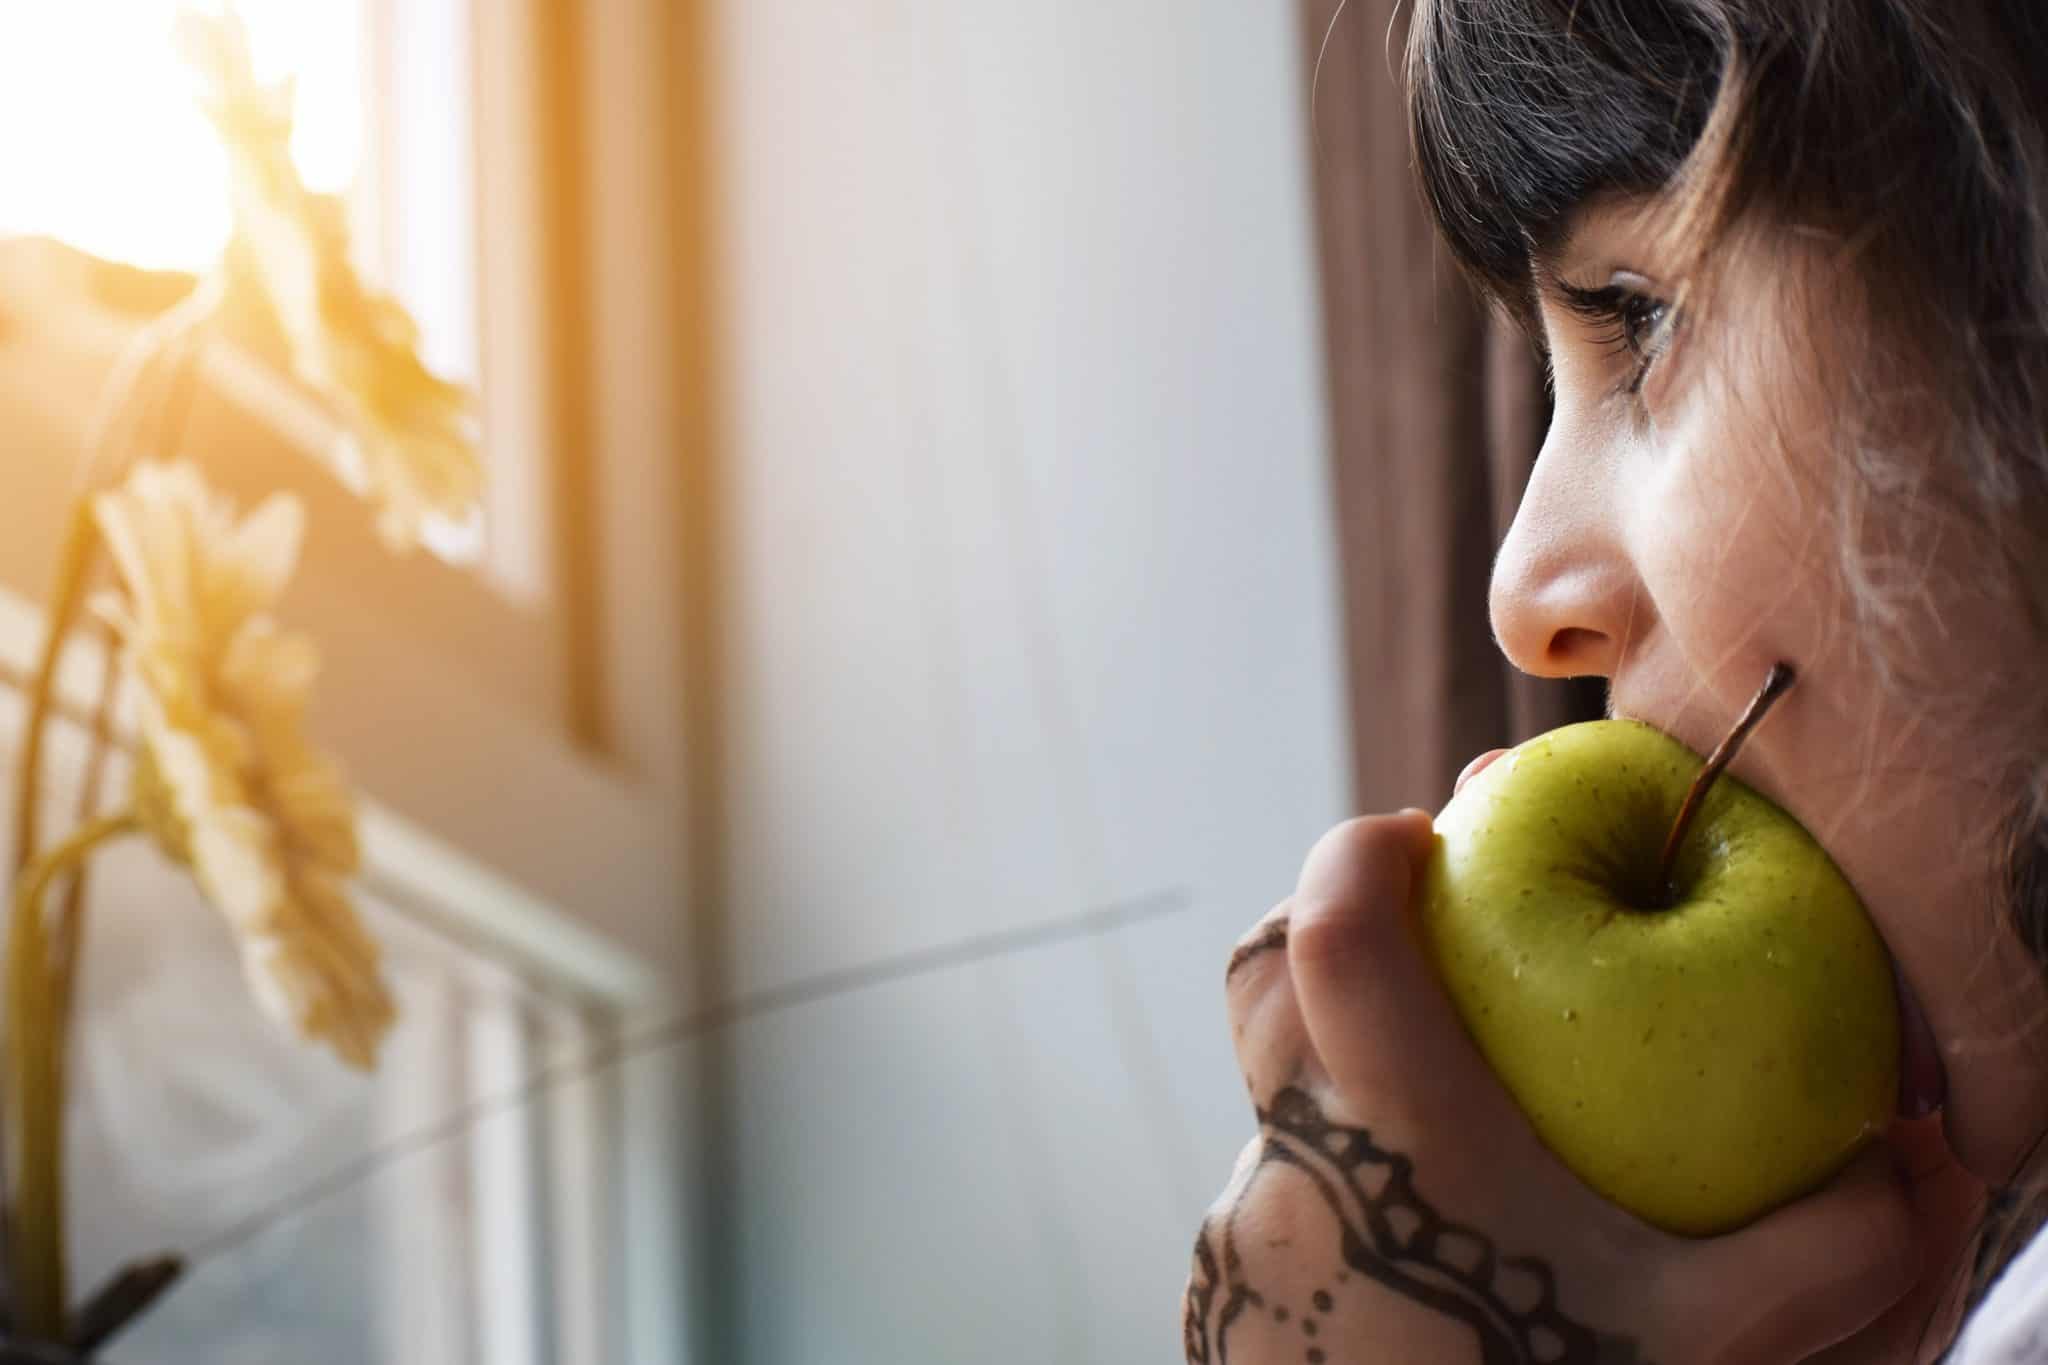 Girl with tattooed hand eating green apple by a window.